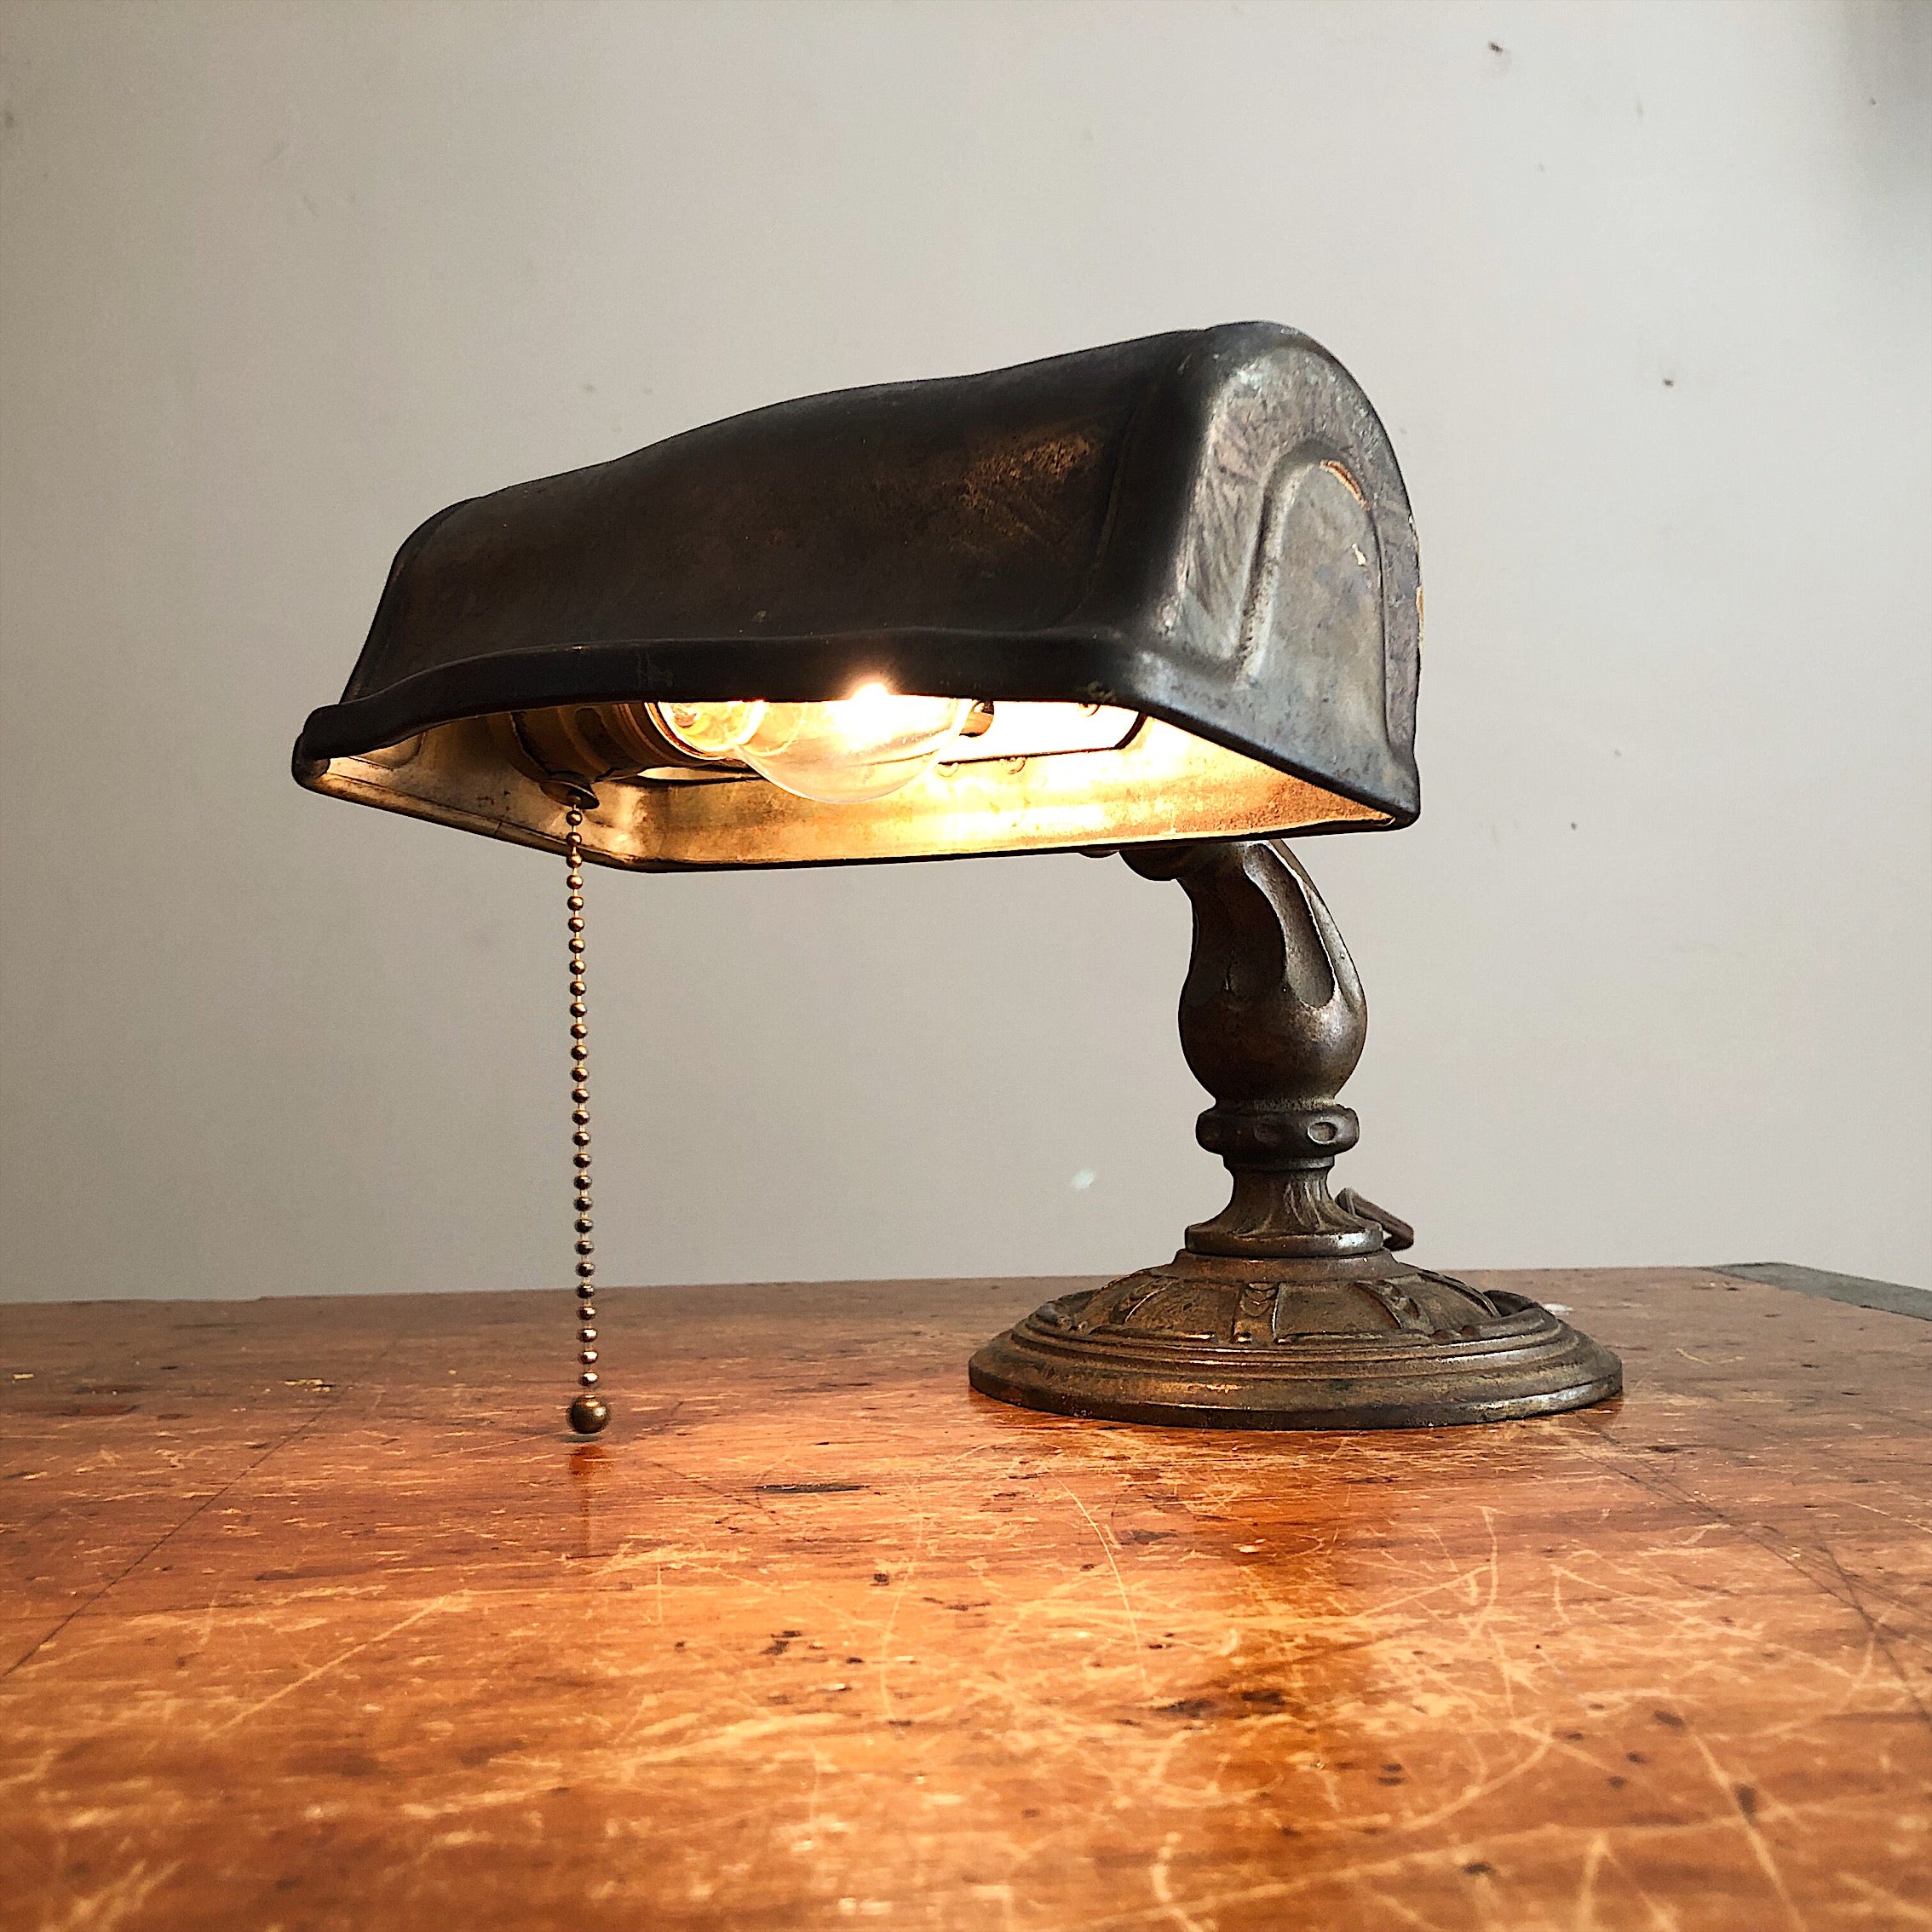 Rare Aladdin Lamp with Ornate Cast Iron Base - Antique Industrial Decor - Vintage - 1920s Table Lamp